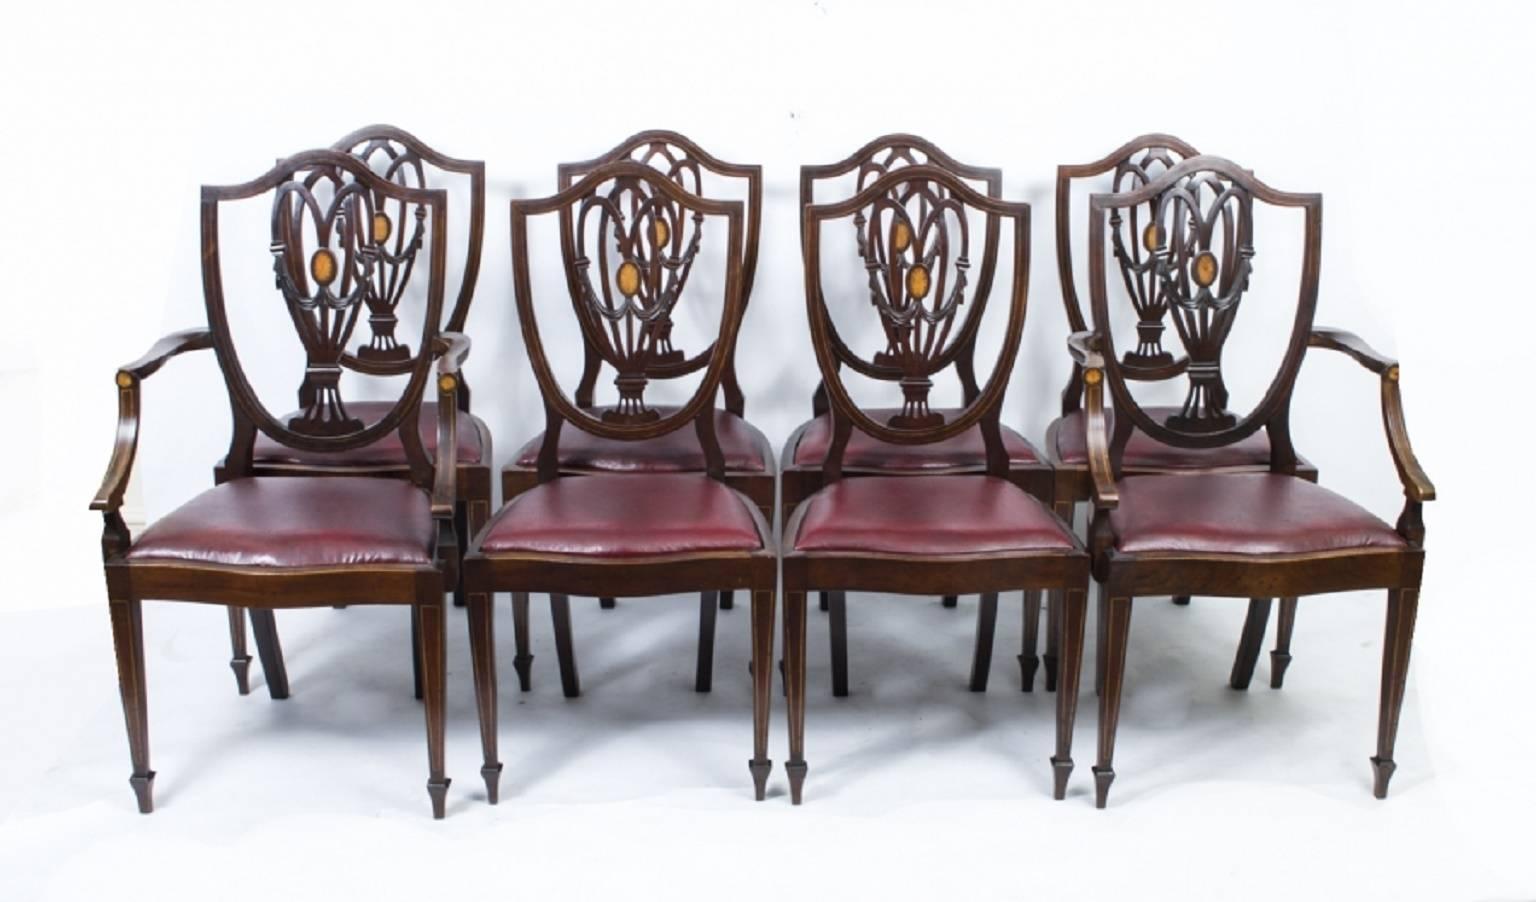 Early 20th Century Antique Edwardian Dining Table with Eight Chairs, circa 1900